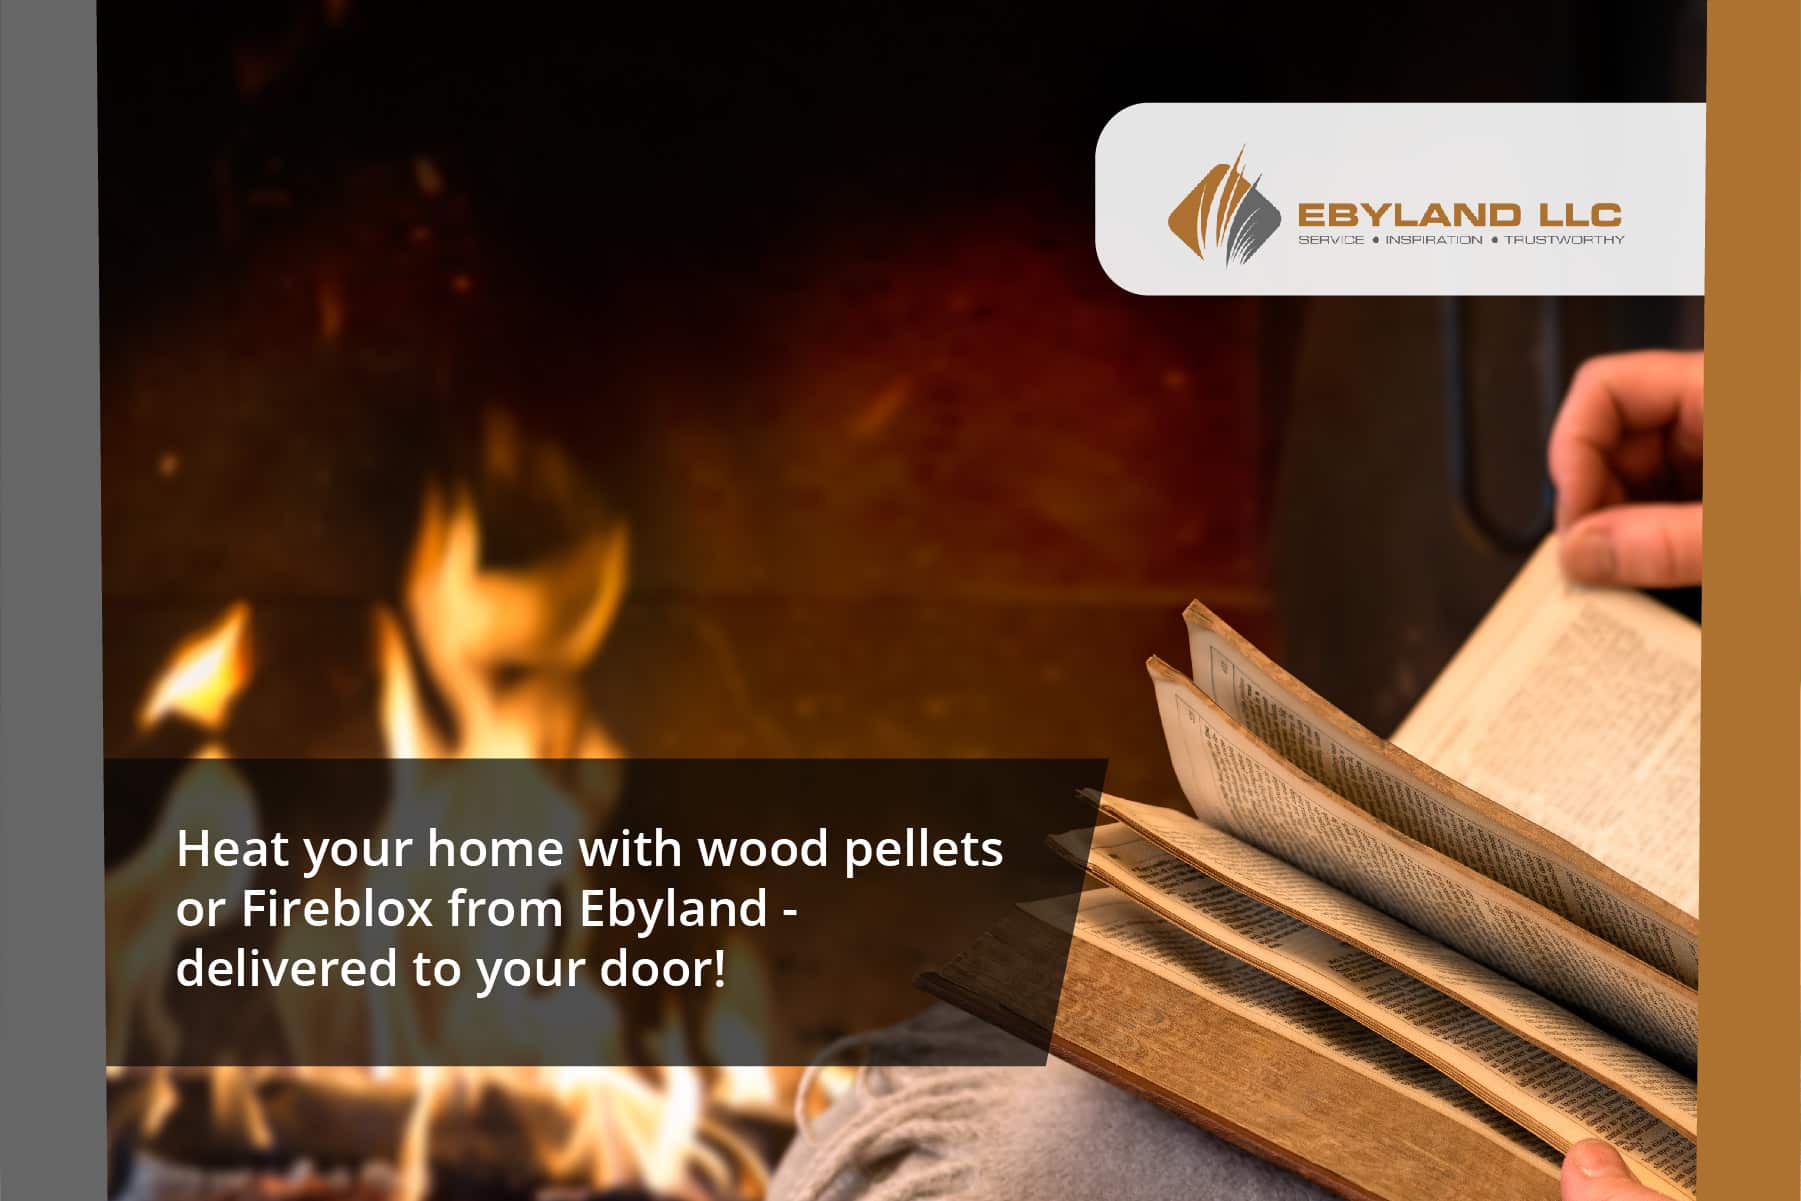 heat your home with wood pellets or fireblox from Ebyland